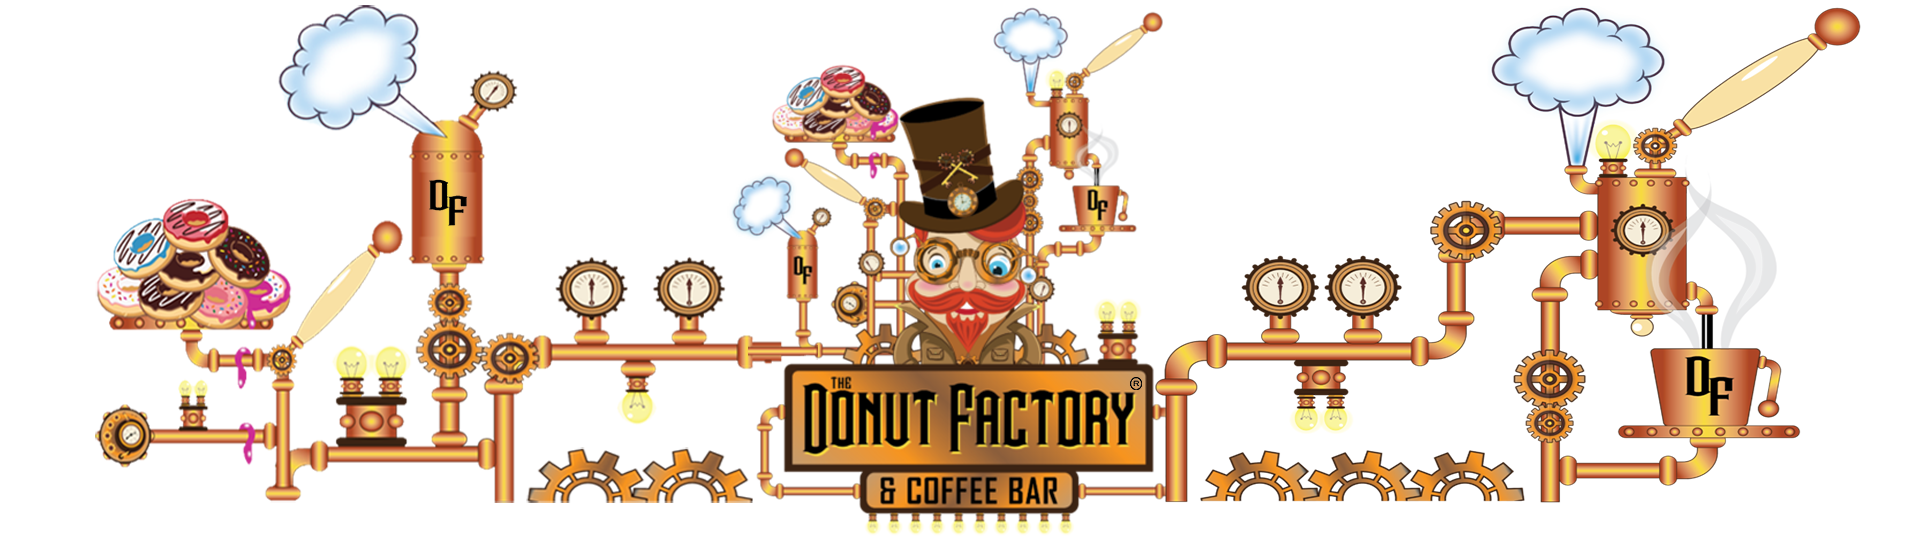 Doughnut clipart word. The real donut factory